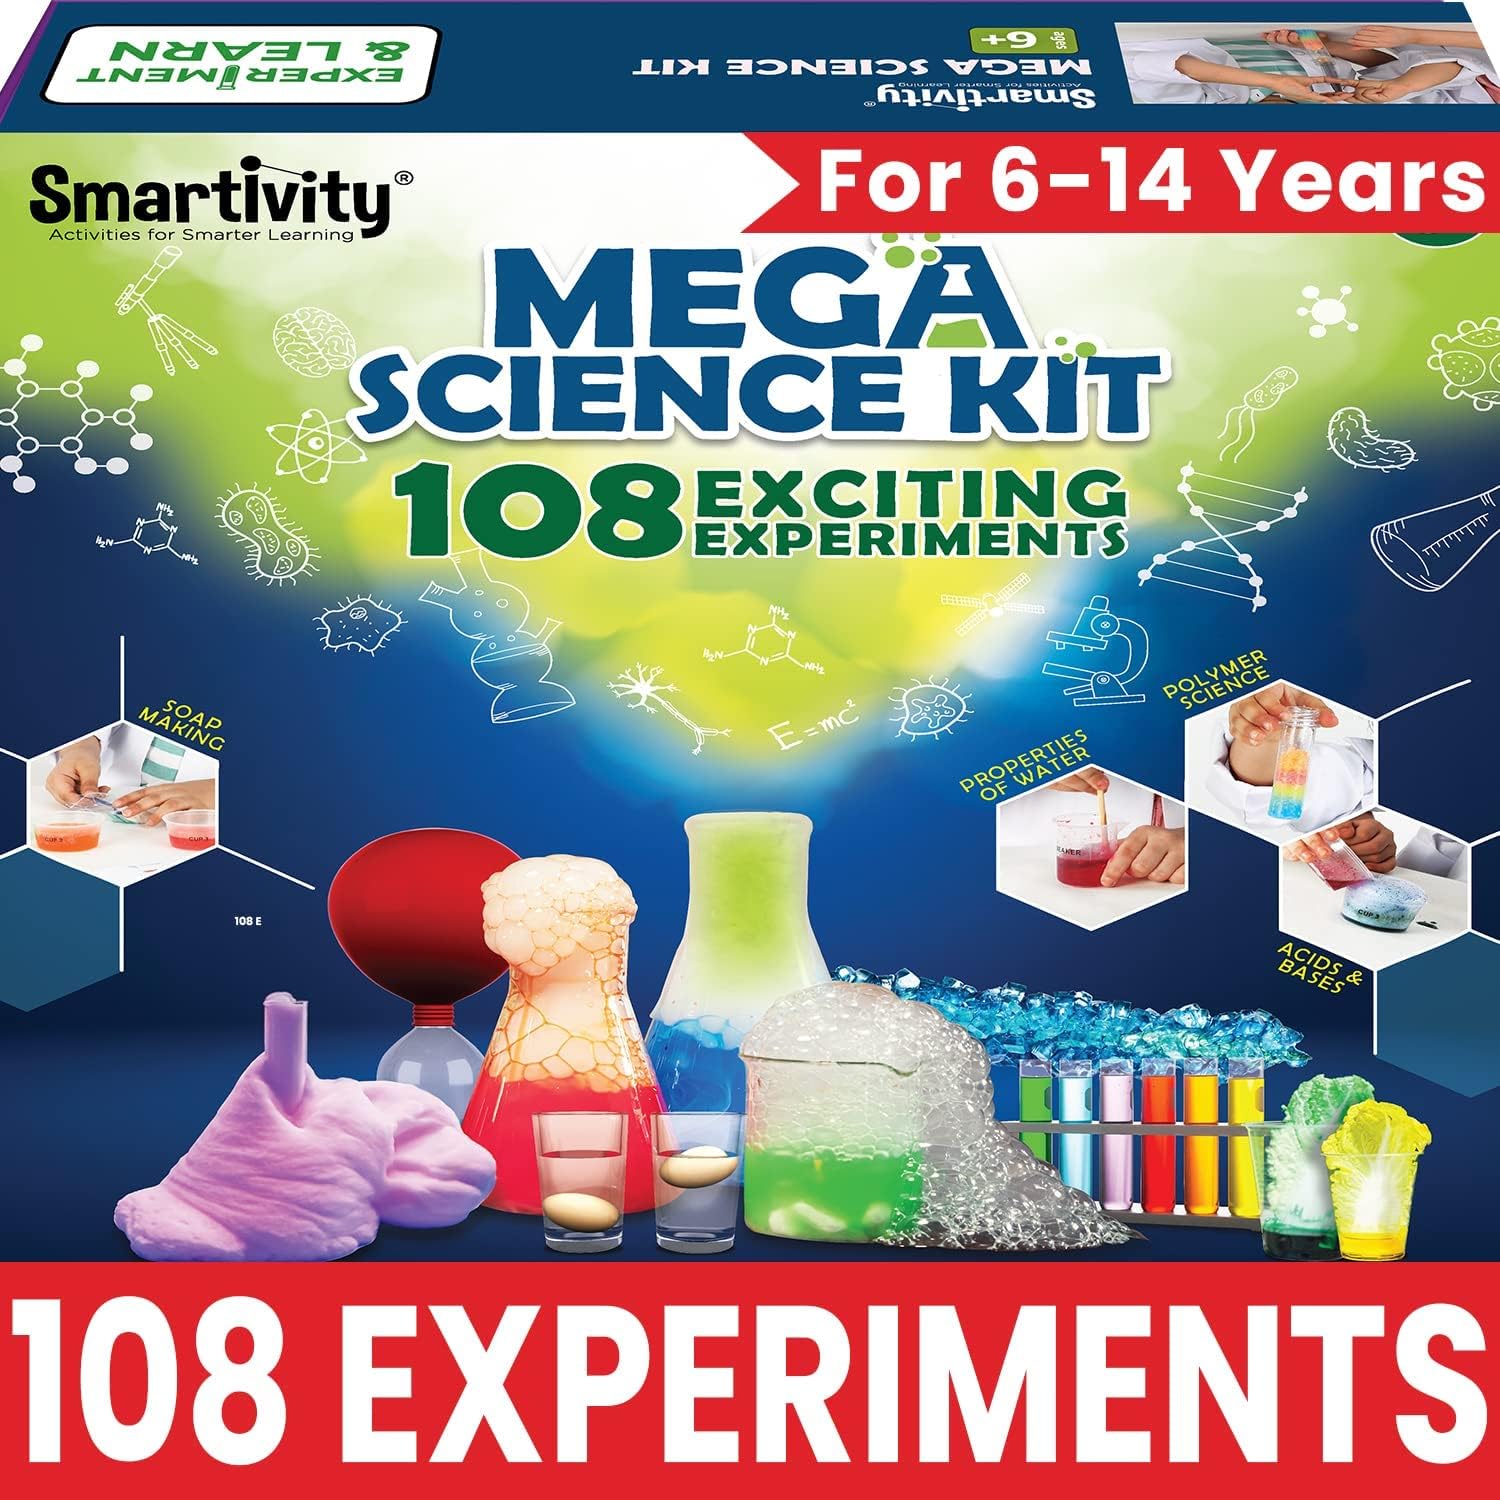  260+ Science Experiments - Over 120 Pcs Science Kits For  Kids Age 5-7-9-12